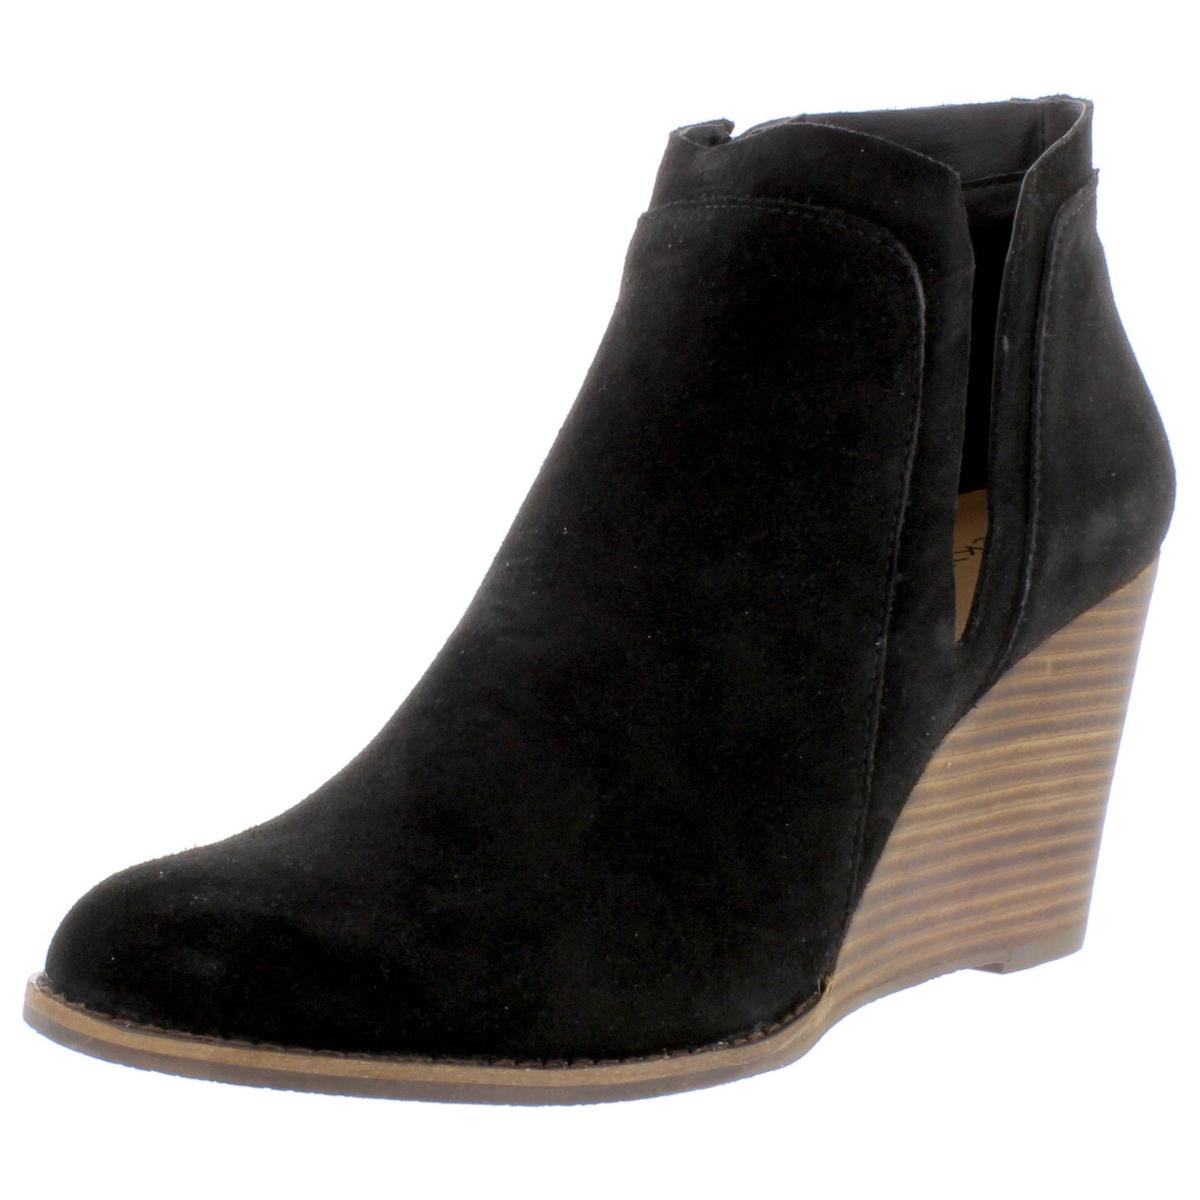 Lucky Brand Women's Yabba Stacked Wedge Ankle Bootie